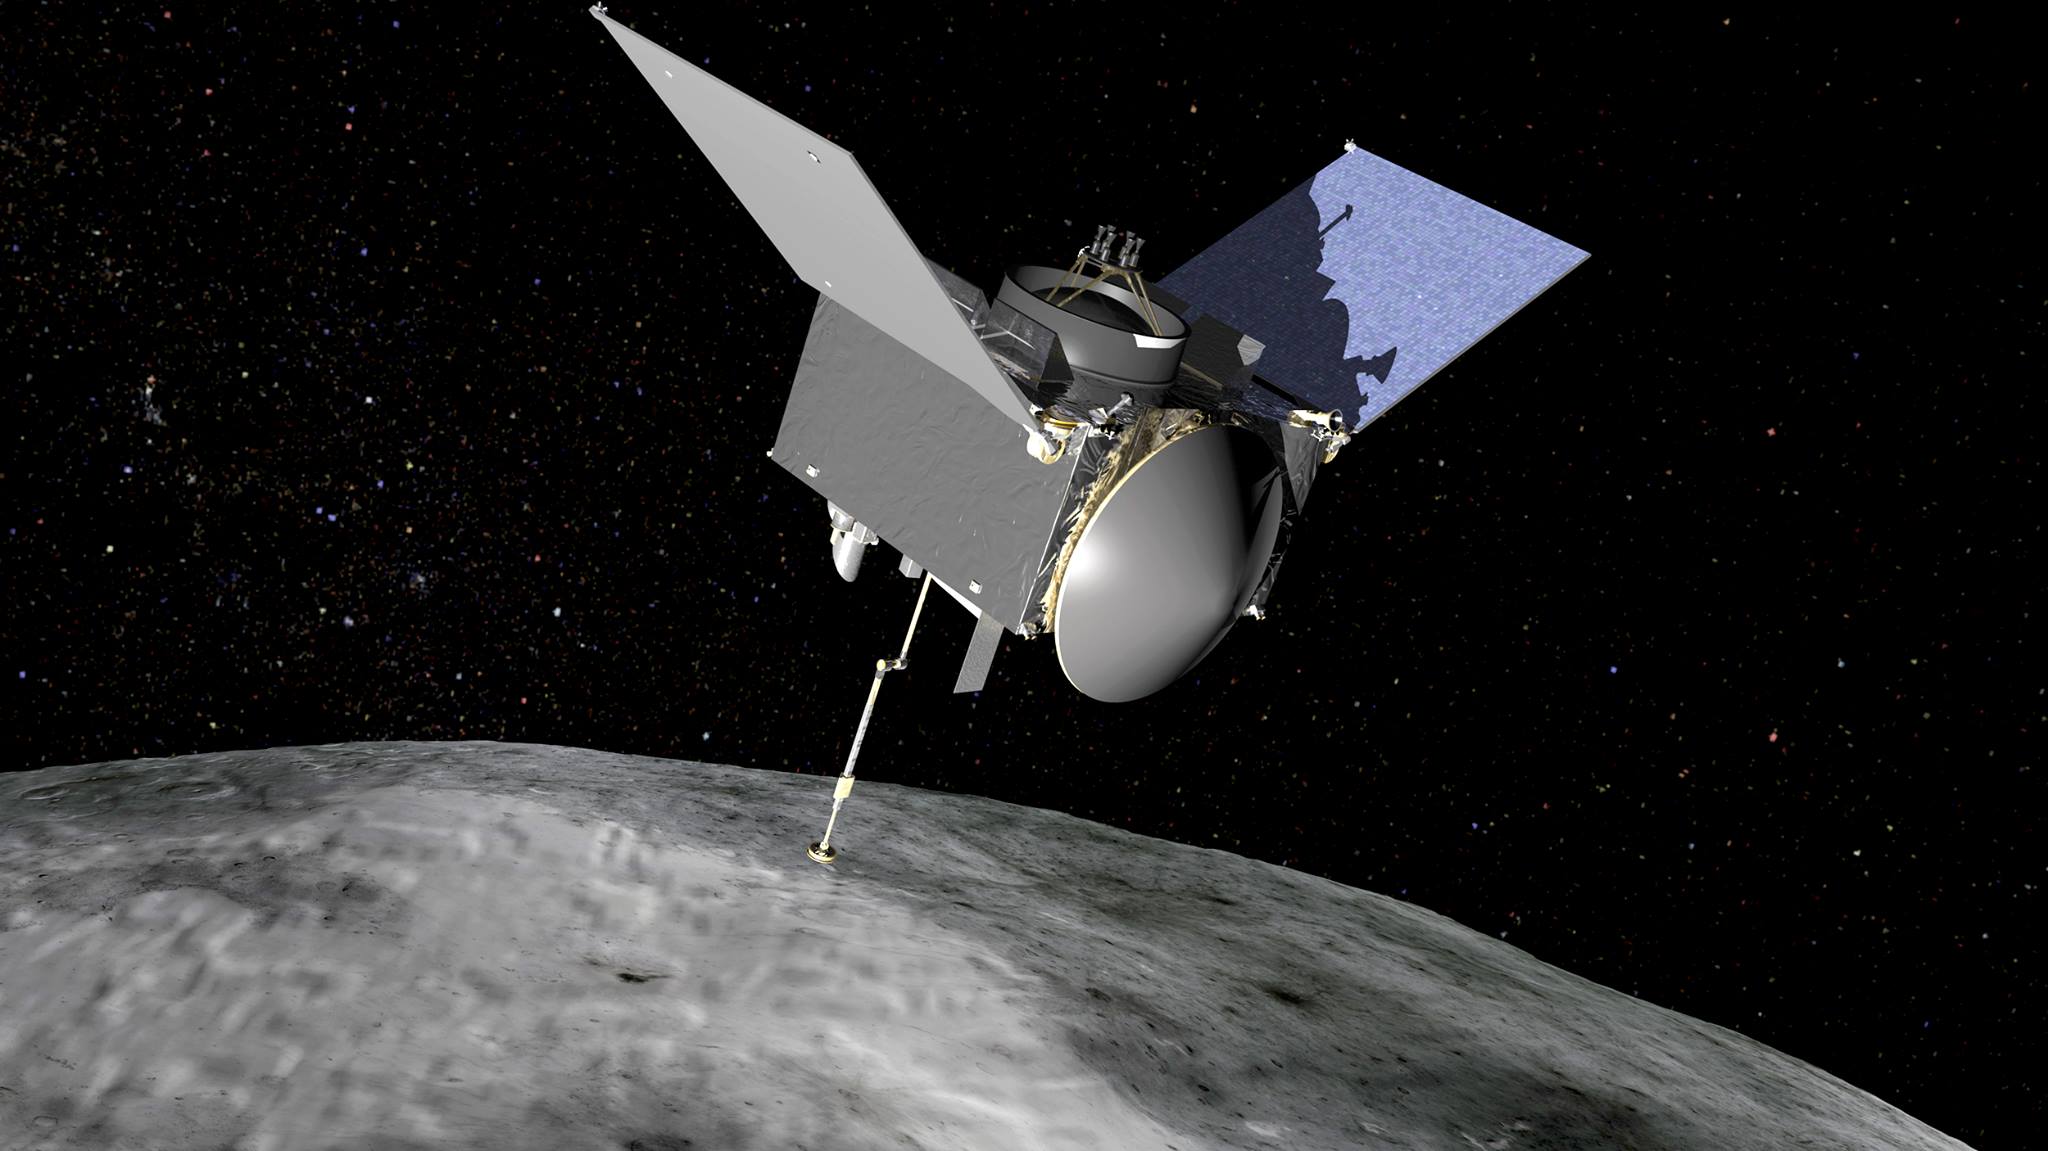 An artist's rendering of OSIRIS-REx at asteroid 101955 Bennu. Its solar arrays will be configured in a "Y-wing" shape to avoid dust accumulation. Image Credit: NASA